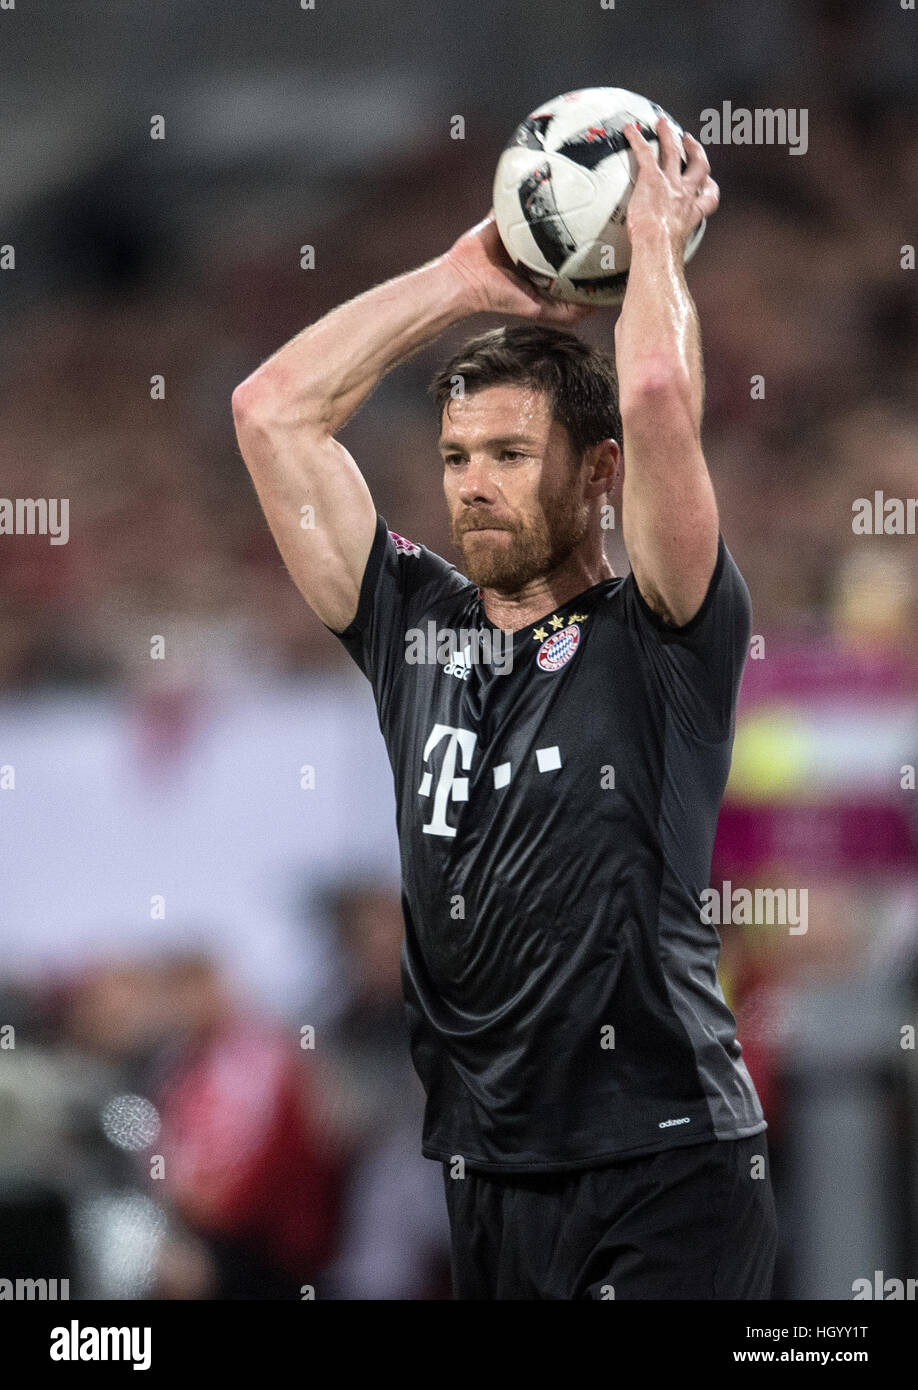 Duesseldorf, Germany. 14th Jan, 2017. Bayern's Xabi Alonso in action during the Telekom Cup soccer match between Fortuna Duesseldorf and Bayern Munich in the ESPRIT arena in Duesseldorf, Germany, 14 January 2017. Photo: Federico Gambarini/dpa/Alamy Live News Stock Photo